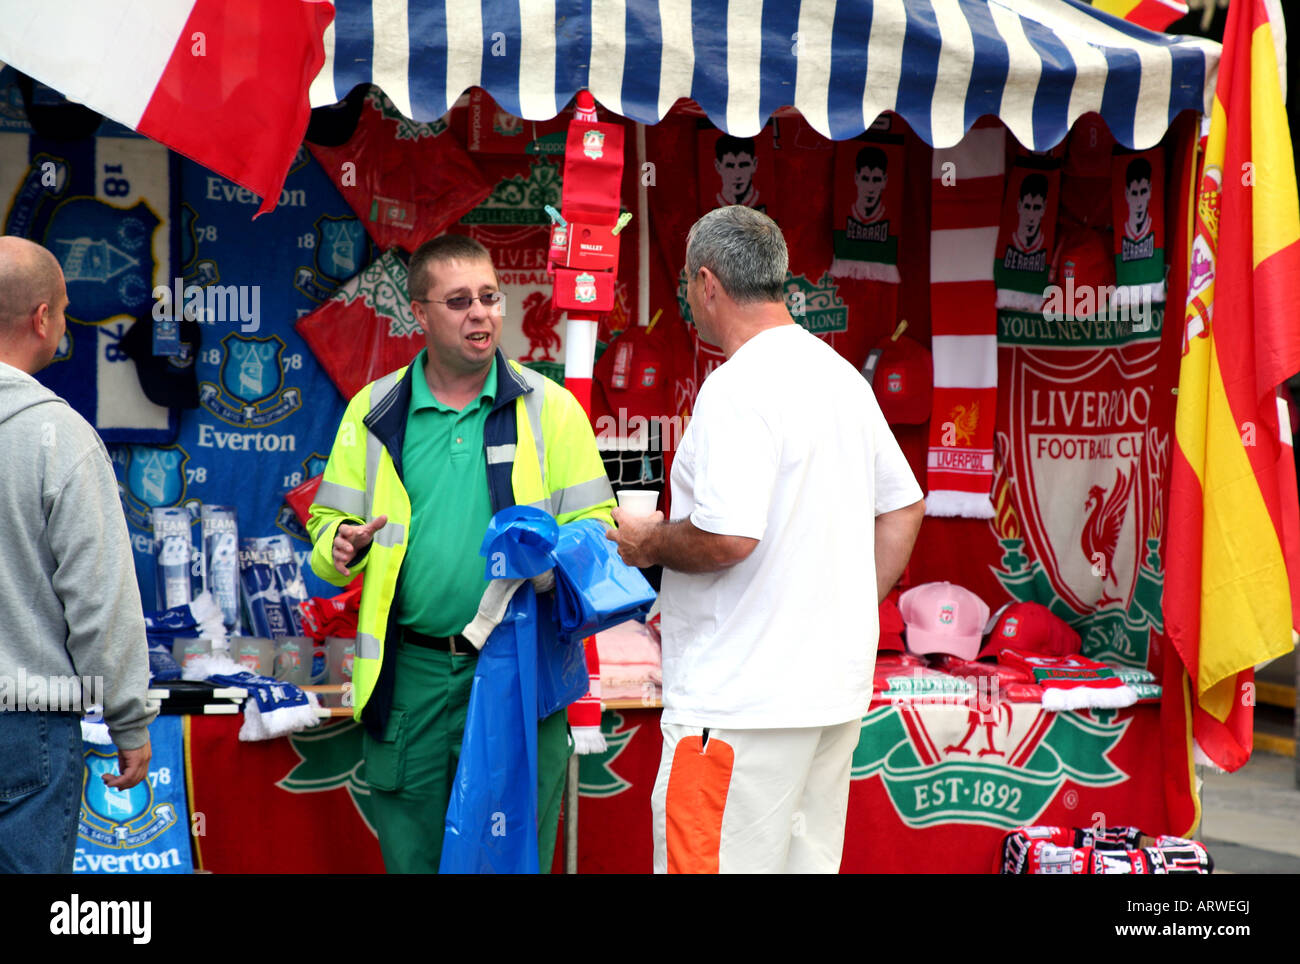 Traders sell Liverpool FC and Everton FC memorabilia off stall in Liverpool city centre Stock Photo